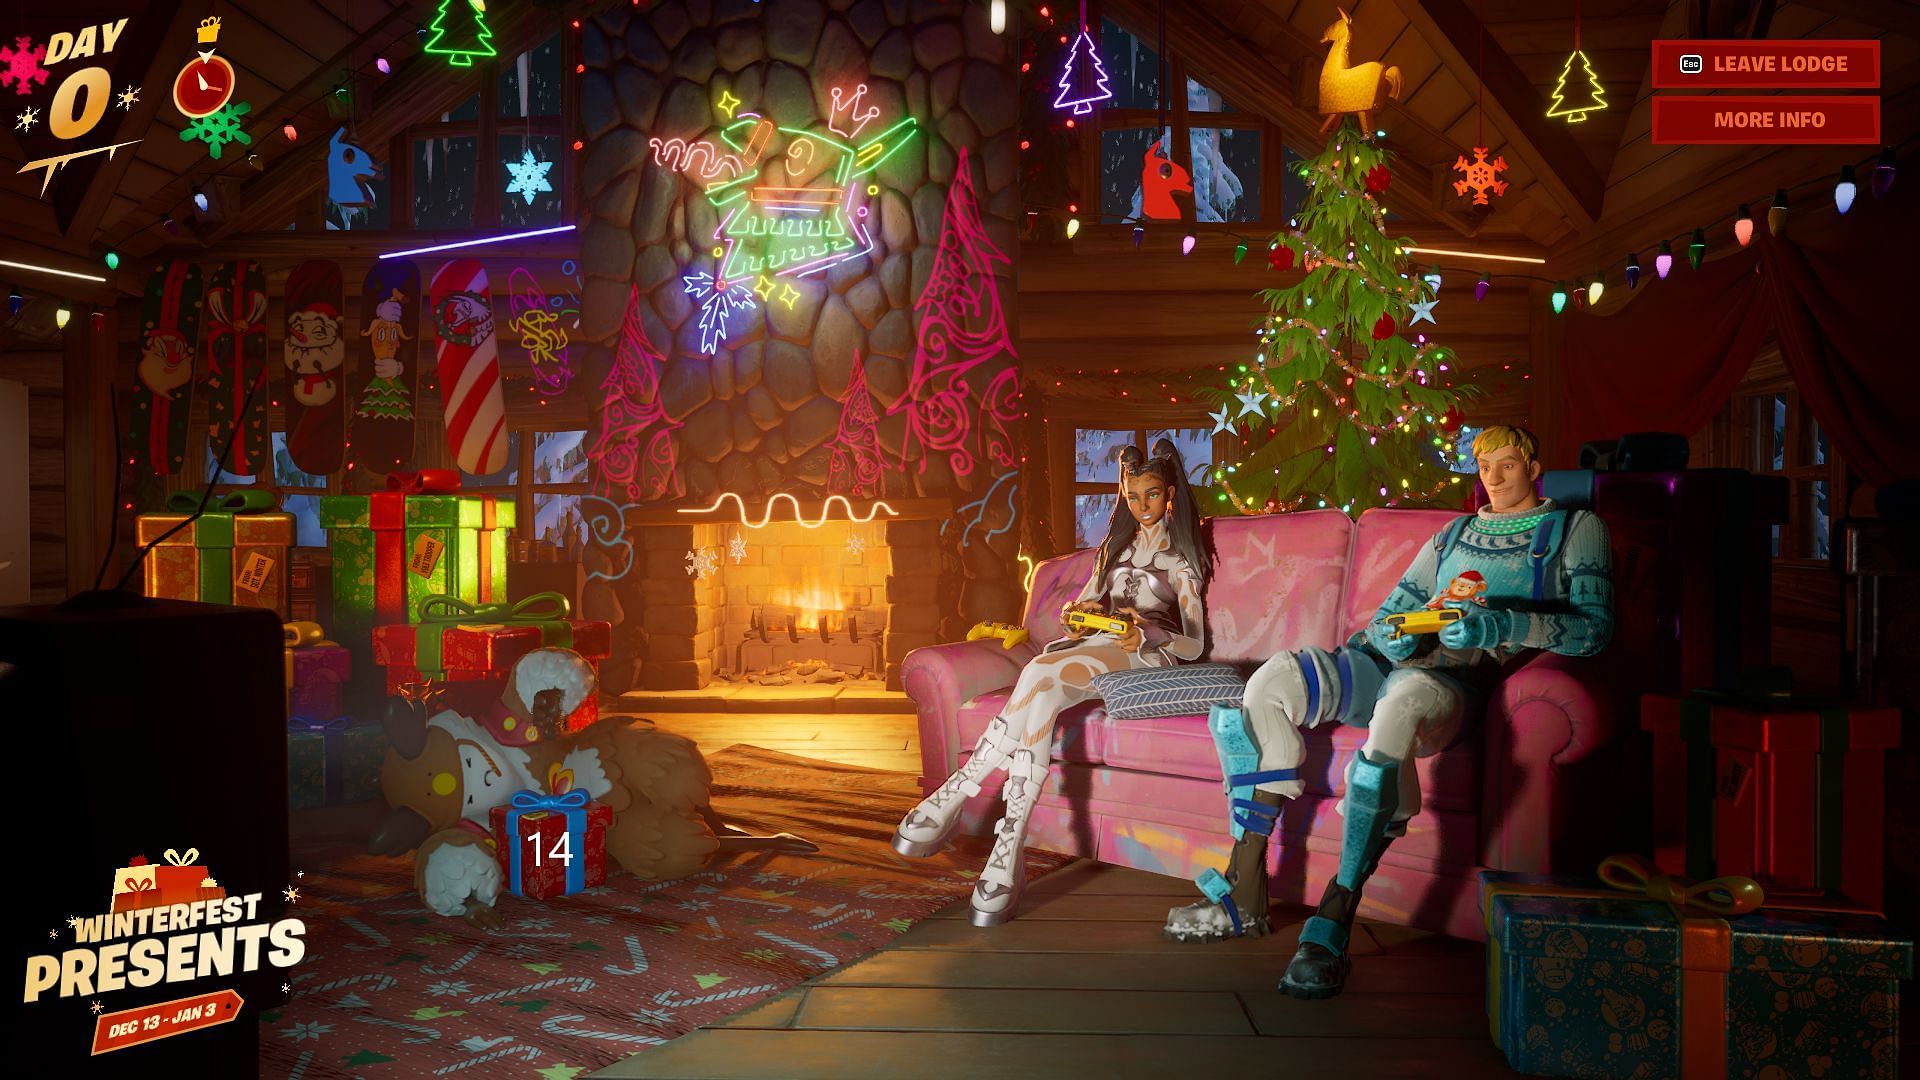 One present is located in the center of the room (Image via Epic Games)